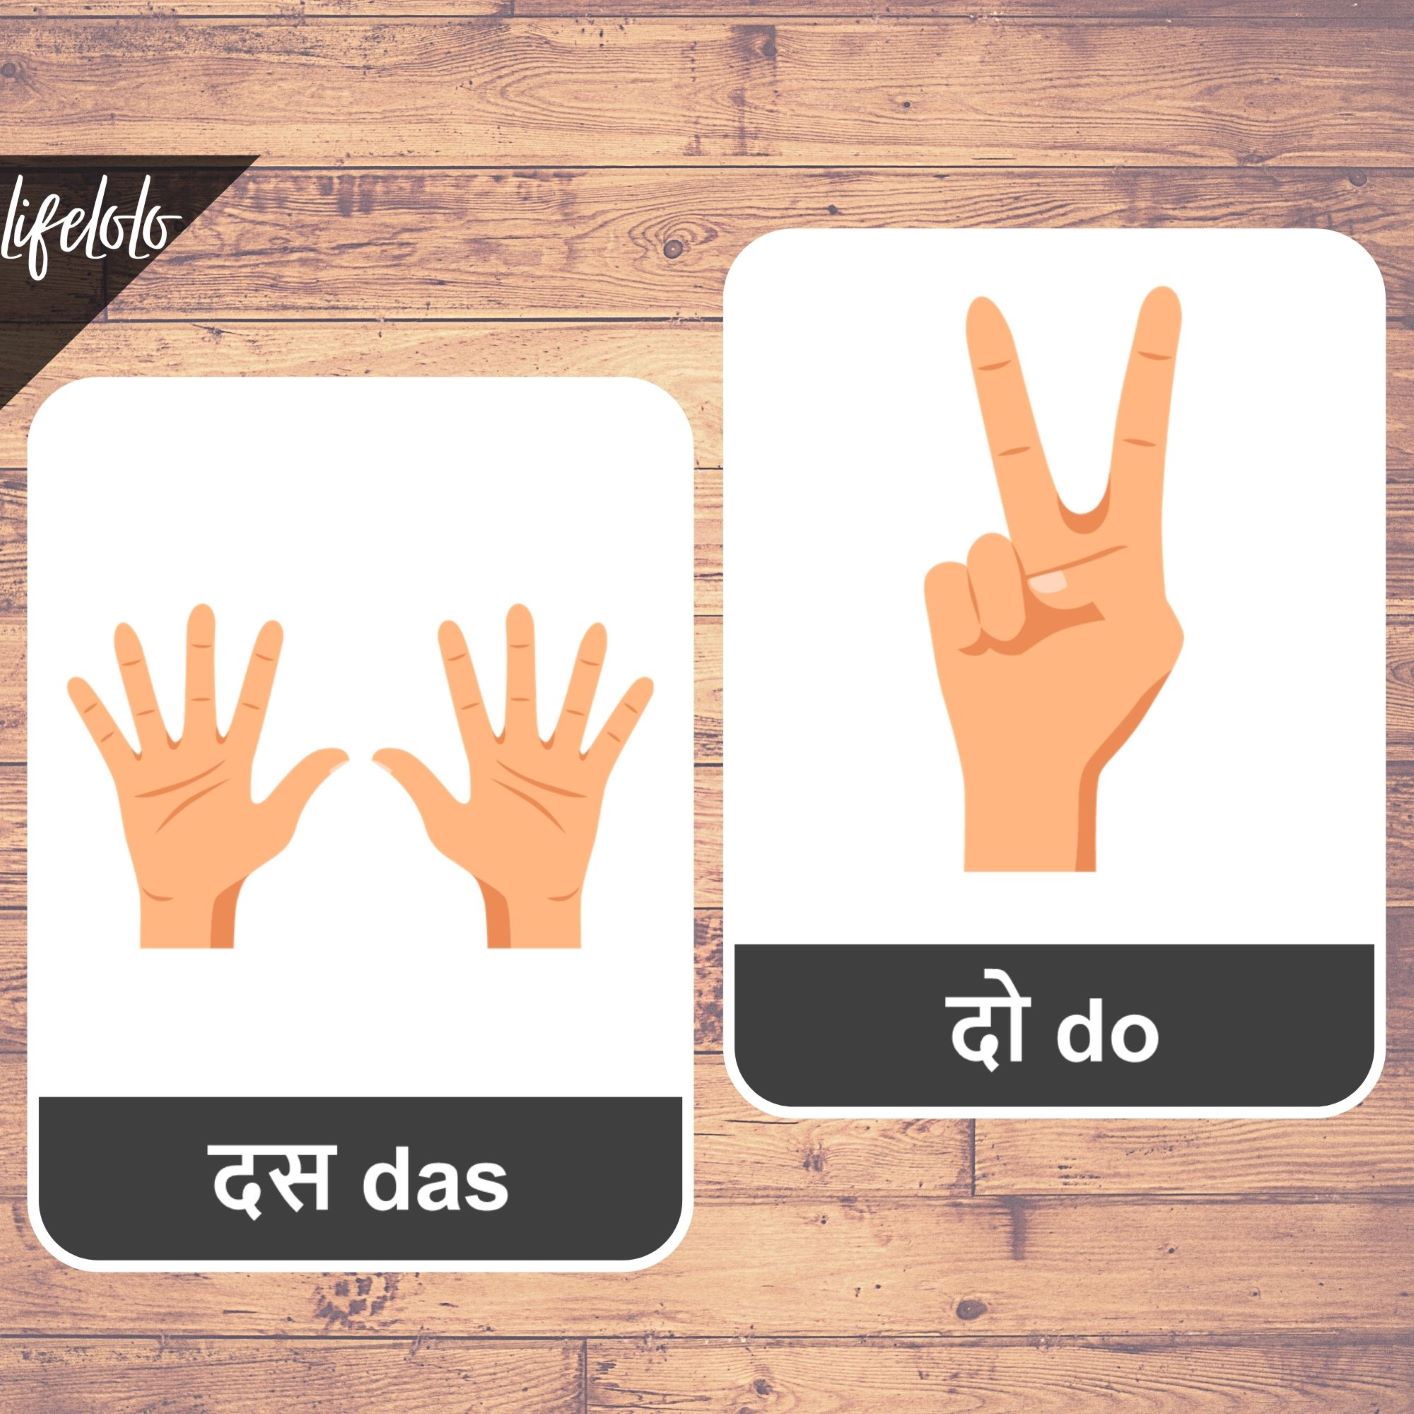 finger counting hindi counting 11 counting flash cards